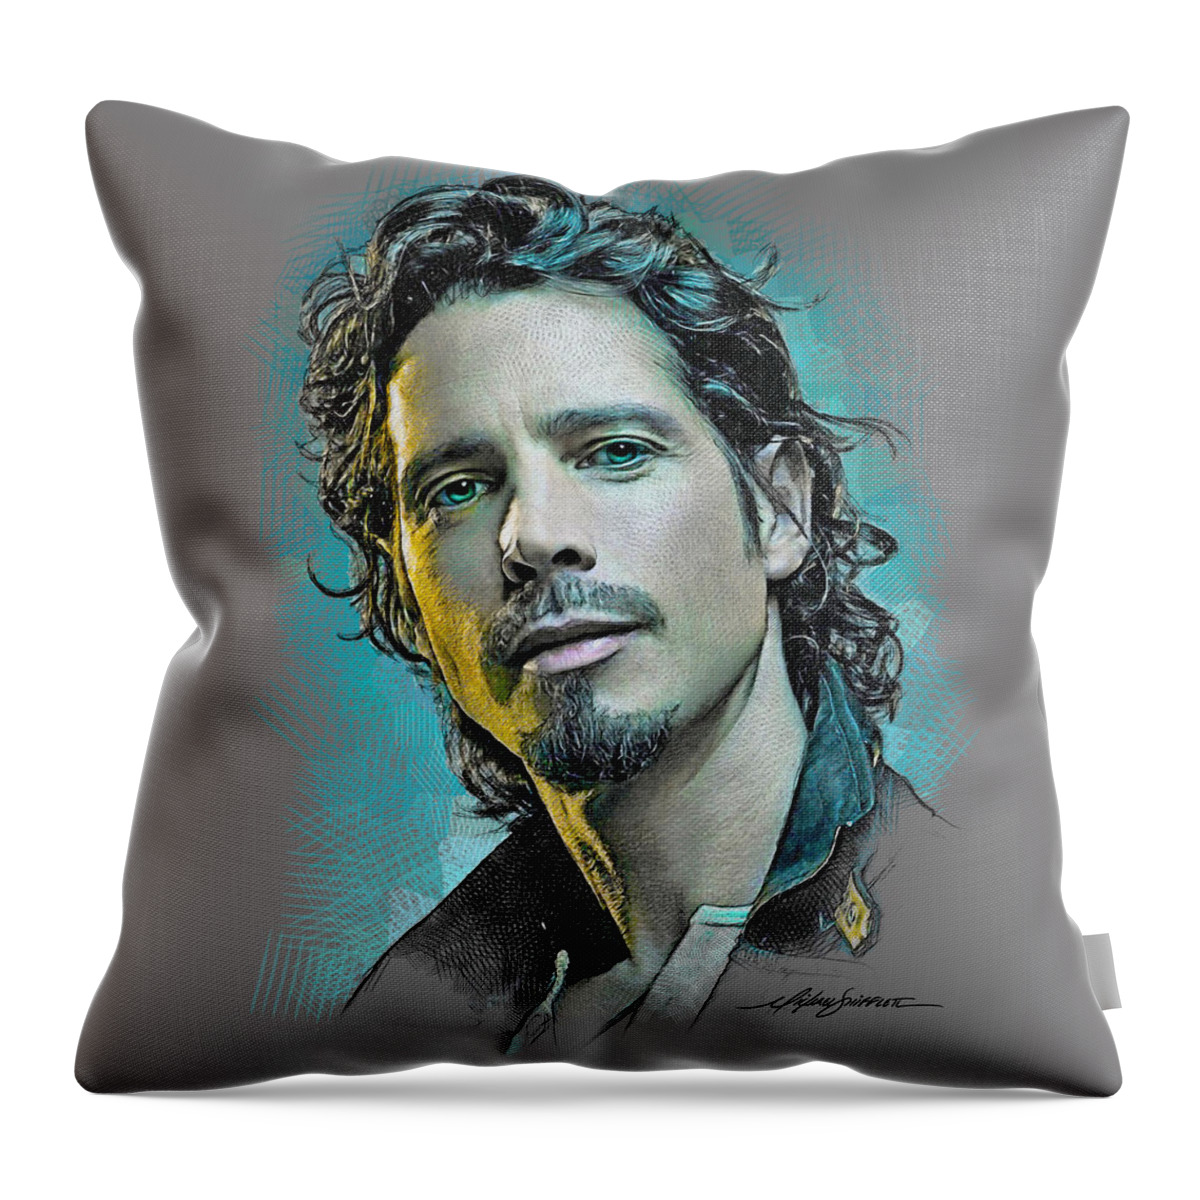 Chris Cornell Throw Pillow featuring the drawing Chris Cornell by Michael Shifflett